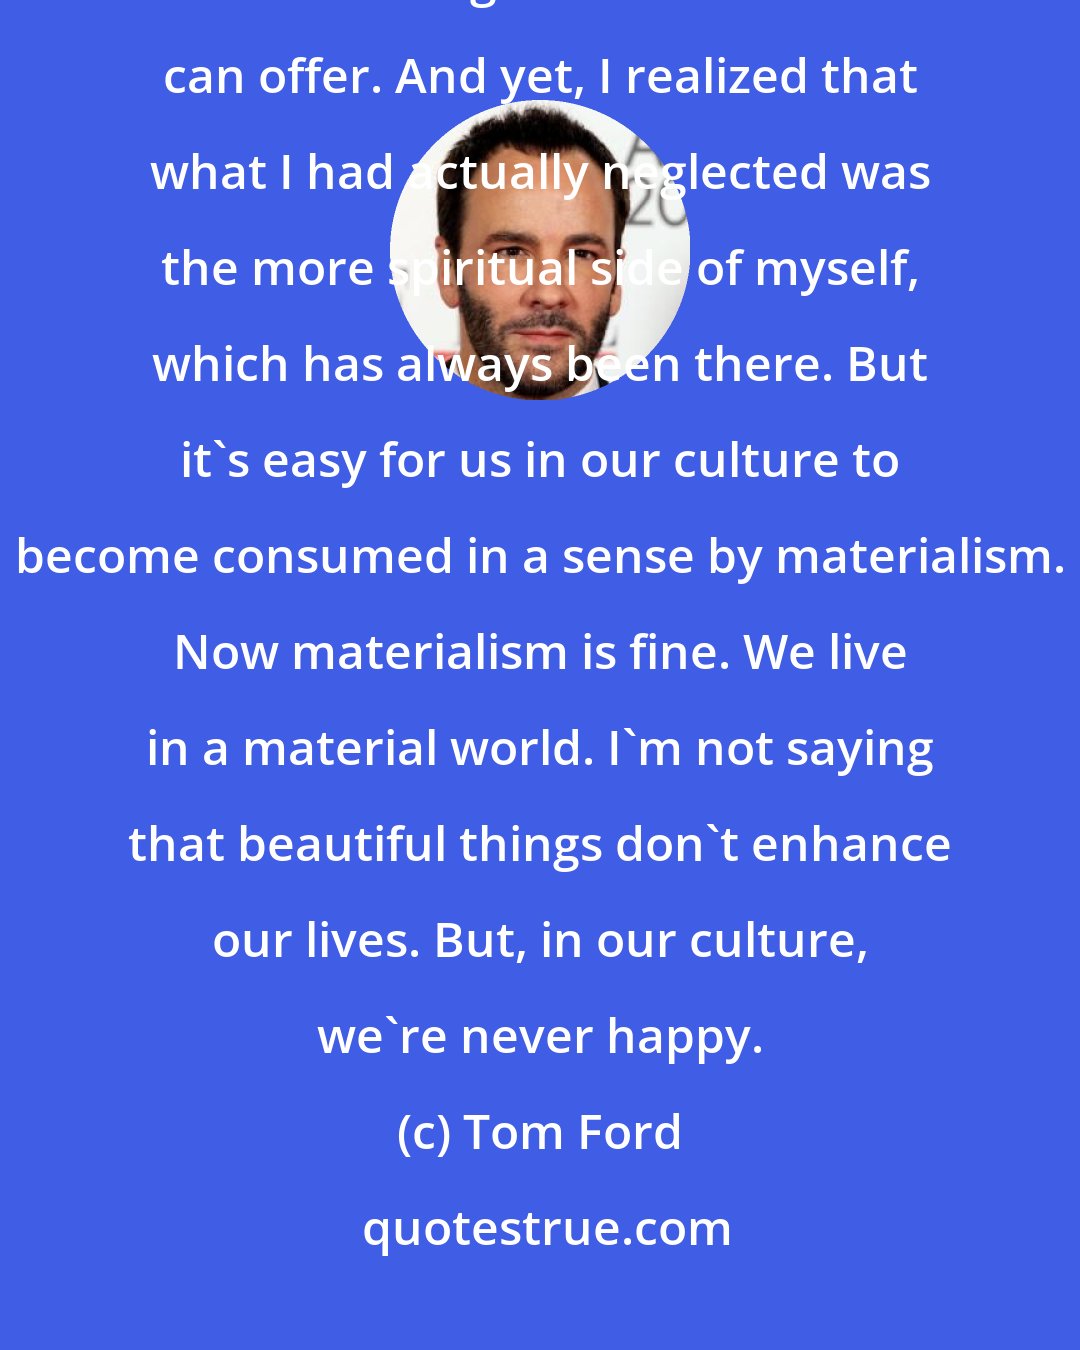 Tom Ford: I was lucky enough to have had great success early on in life; to have had all the things the material world can offer. And yet, I realized that what I had actually neglected was the more spiritual side of myself, which has always been there. But it's easy for us in our culture to become consumed in a sense by materialism. Now materialism is fine. We live in a material world. I'm not saying that beautiful things don't enhance our lives. But, in our culture, we're never happy.